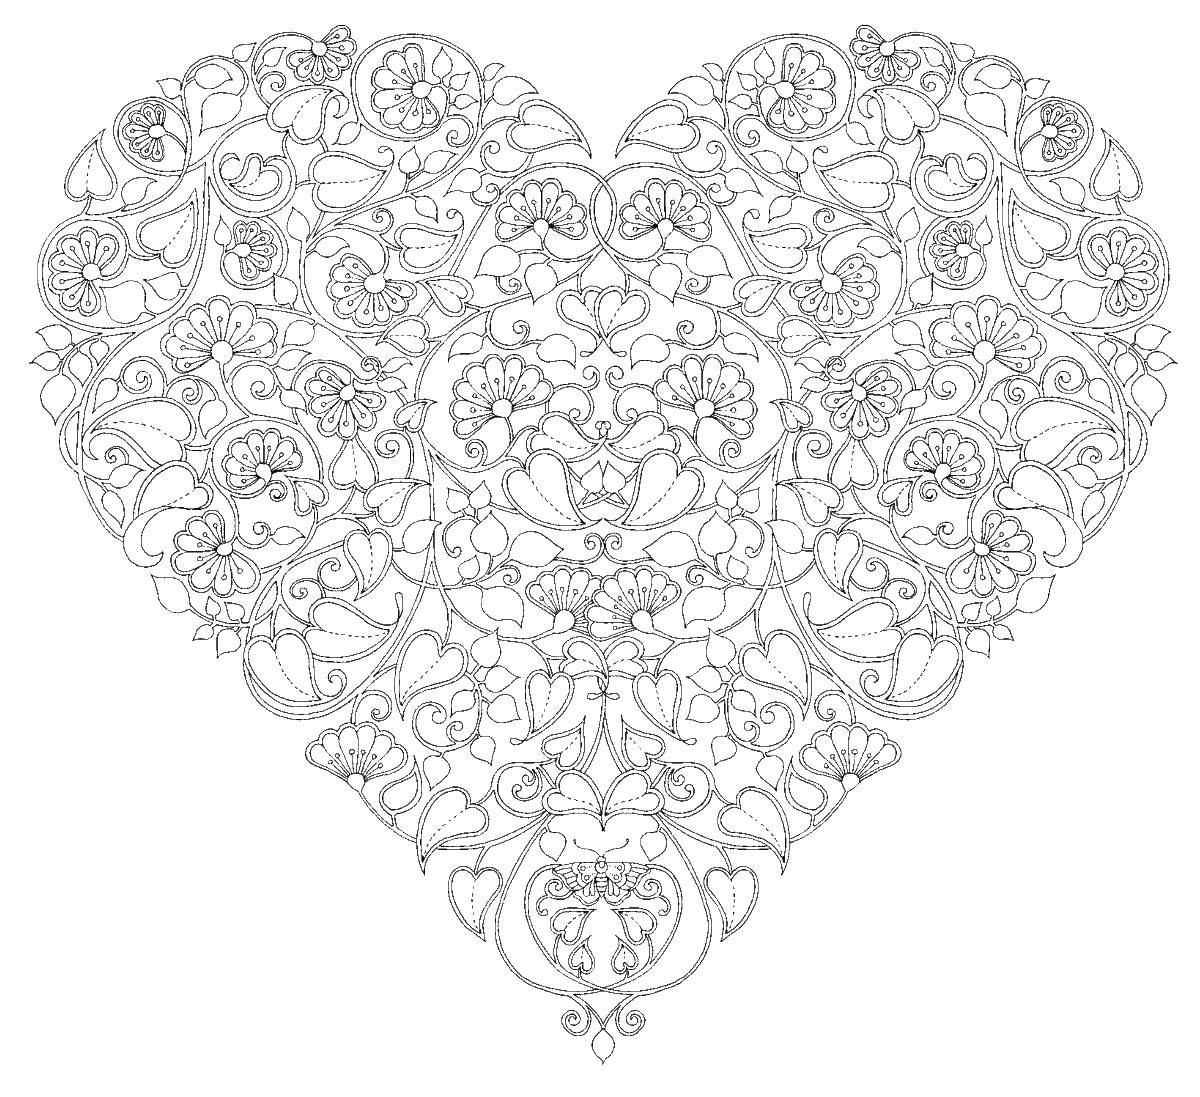 Coloring Heart made of flowers and leaves. Category coloring for adults. Tags:  for adults, antistress, patterns.